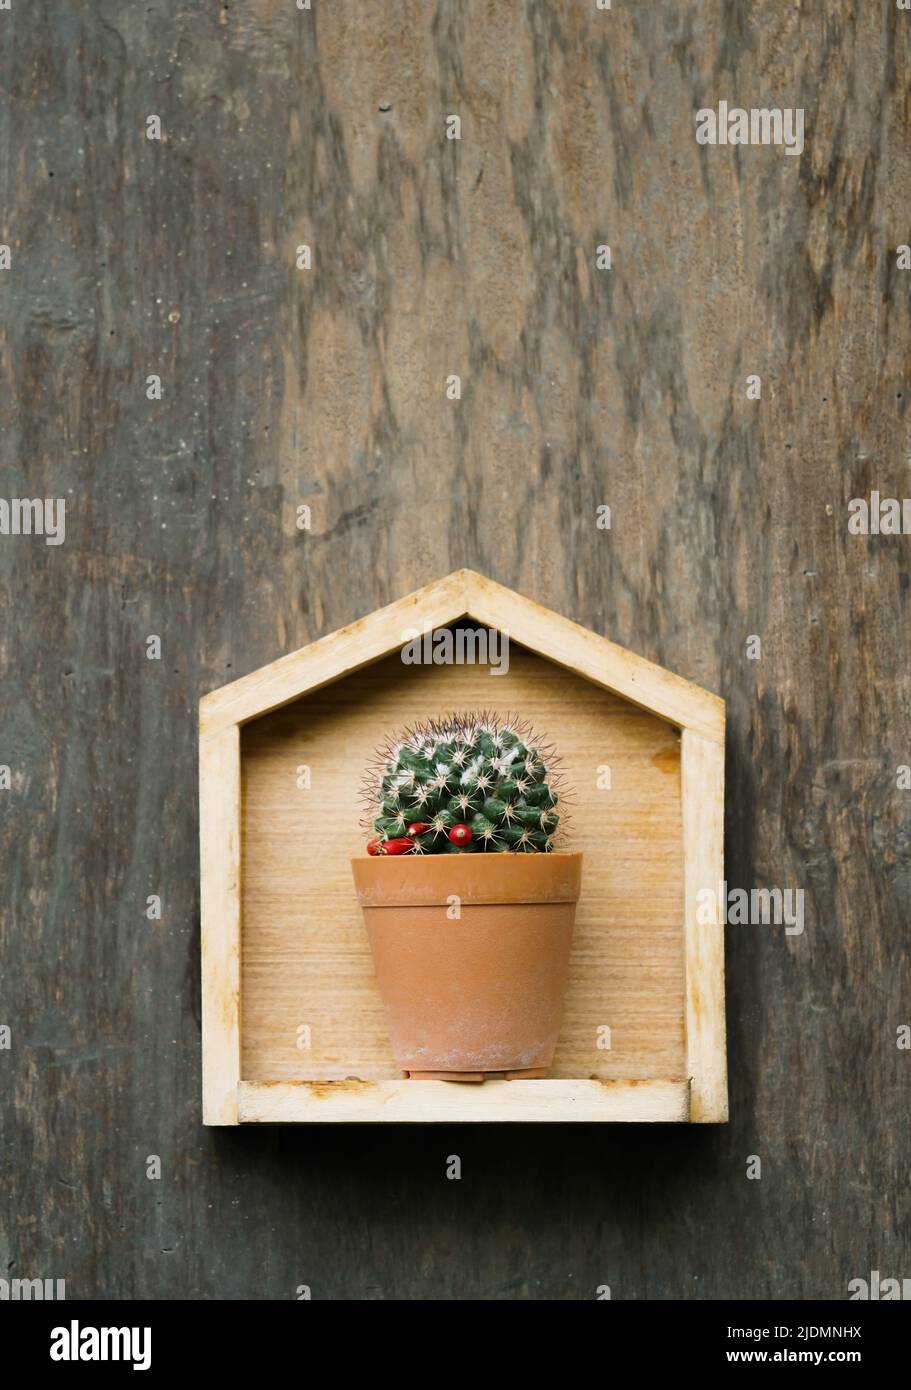 cactus in small pot on wood background Stock Photo